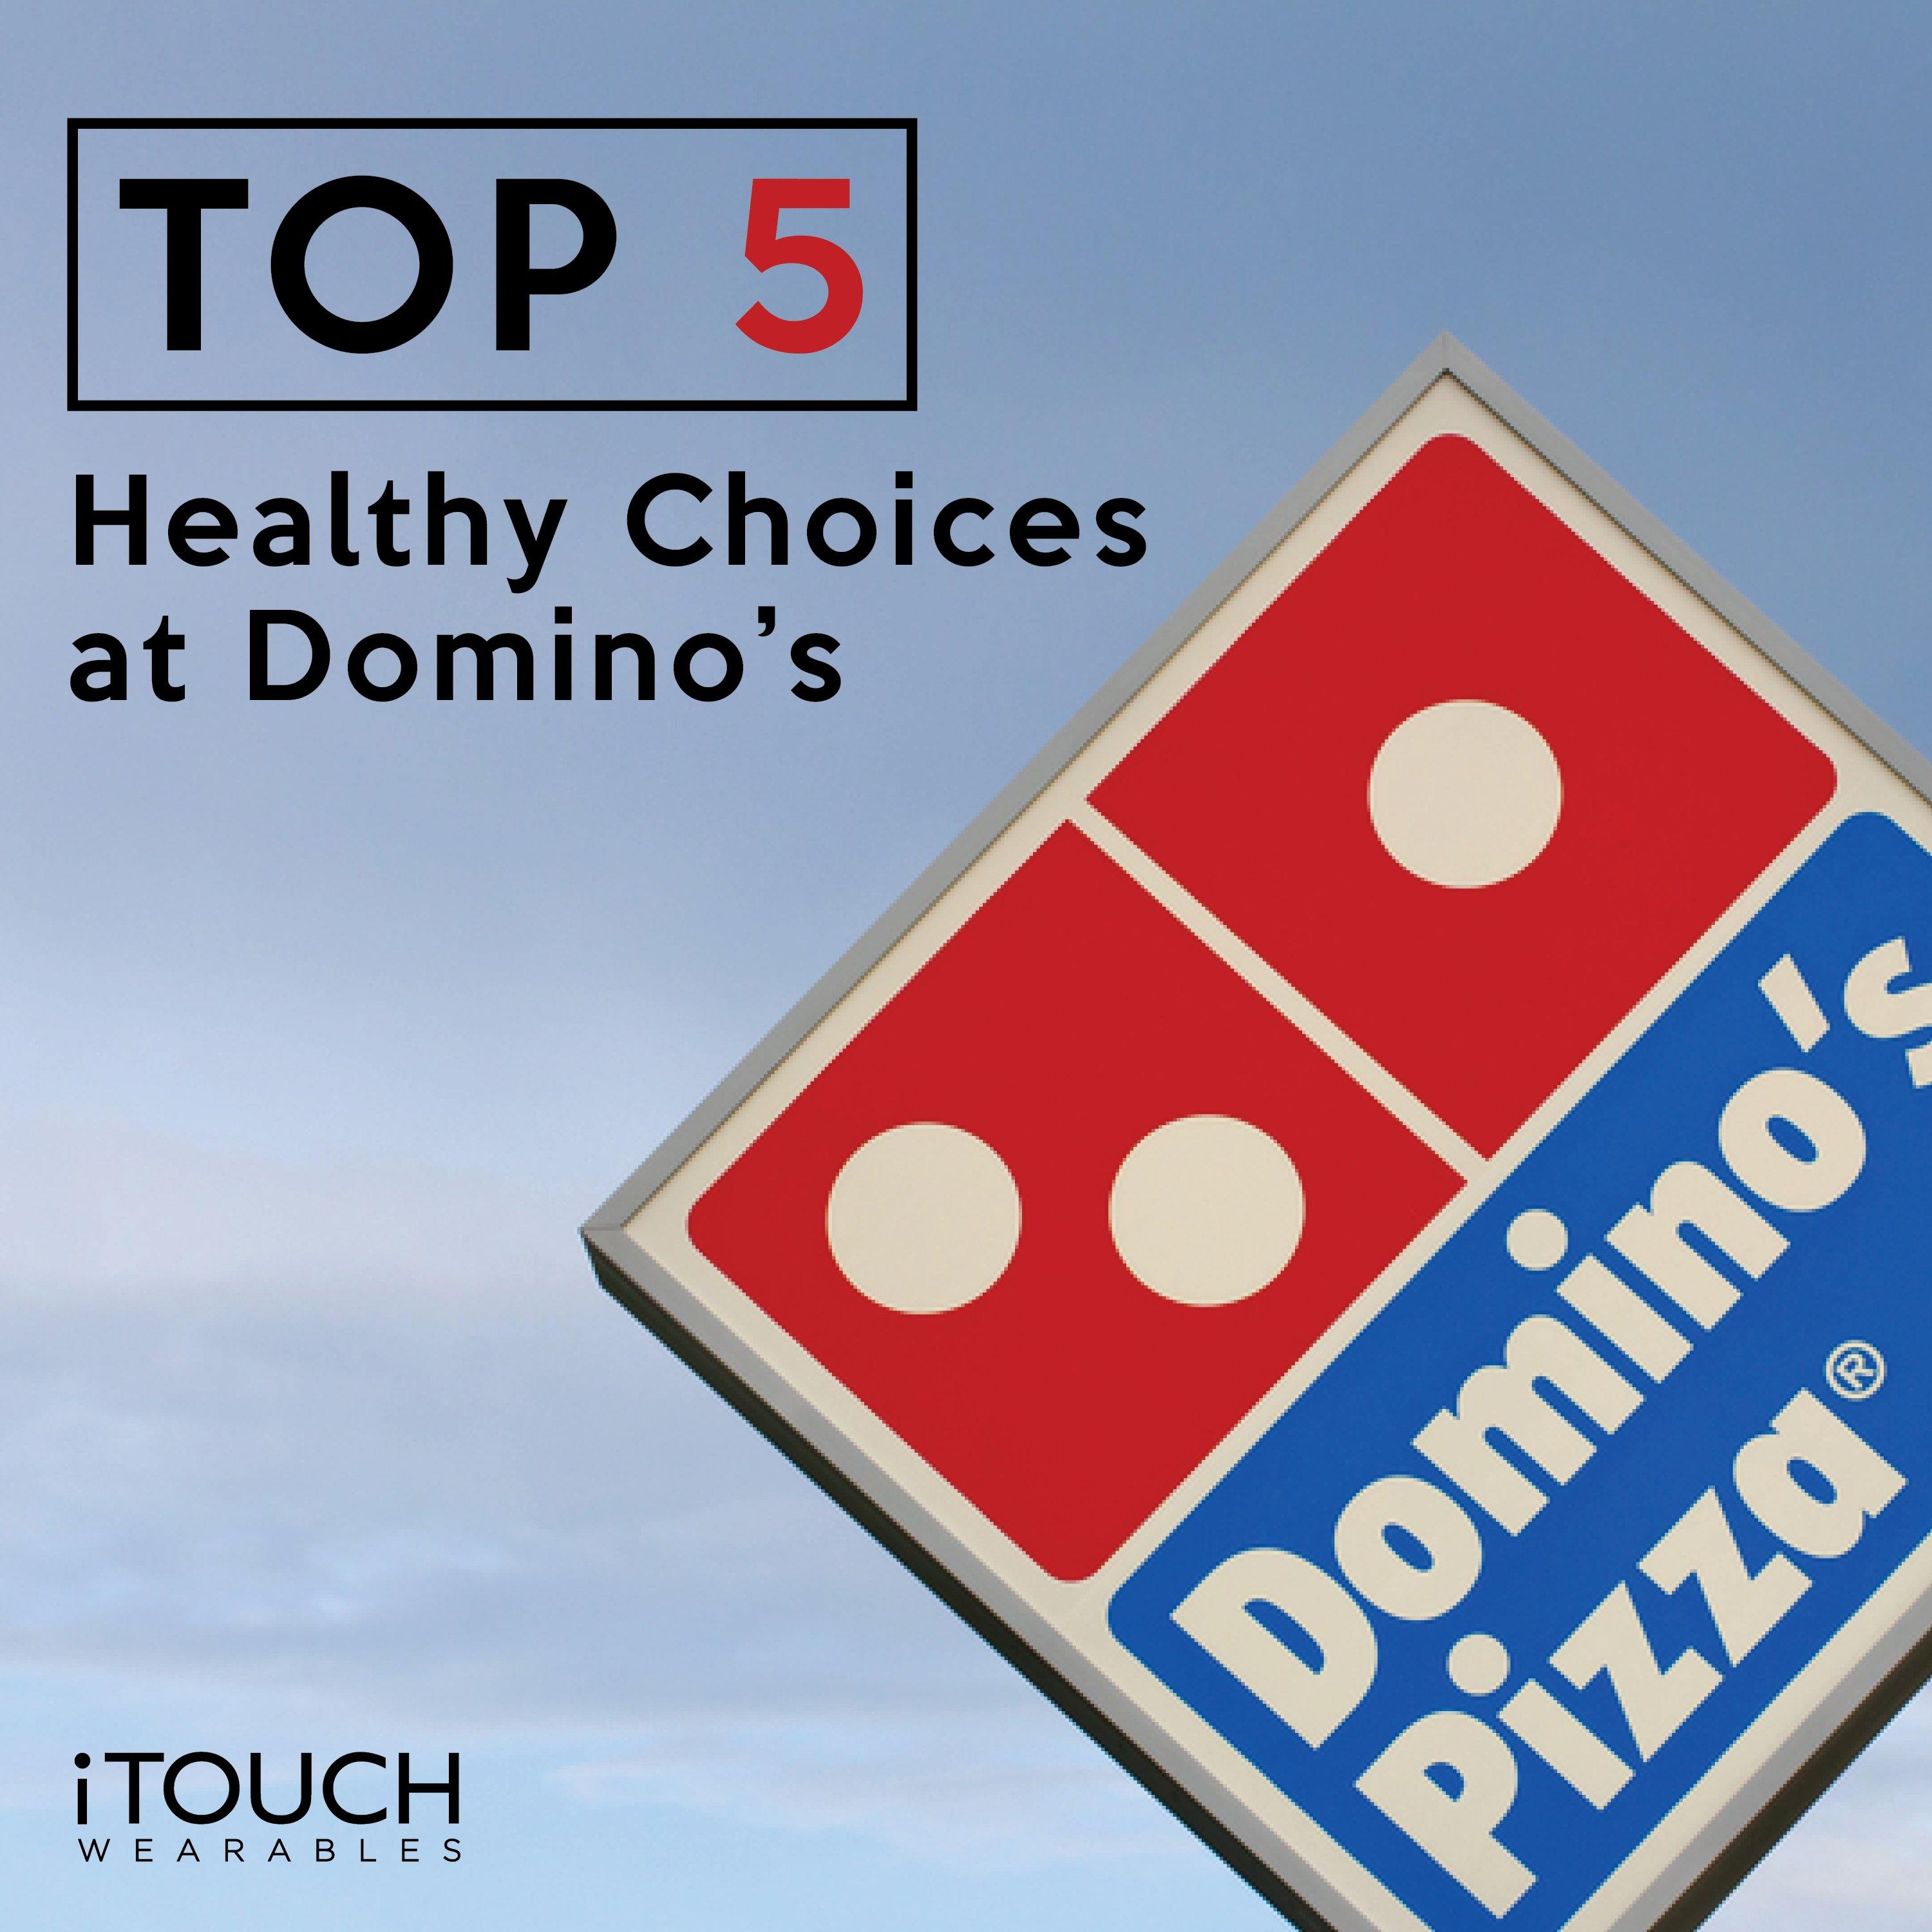 Top 5 Healthy Choices at Domino's - iTOUCH Wearables